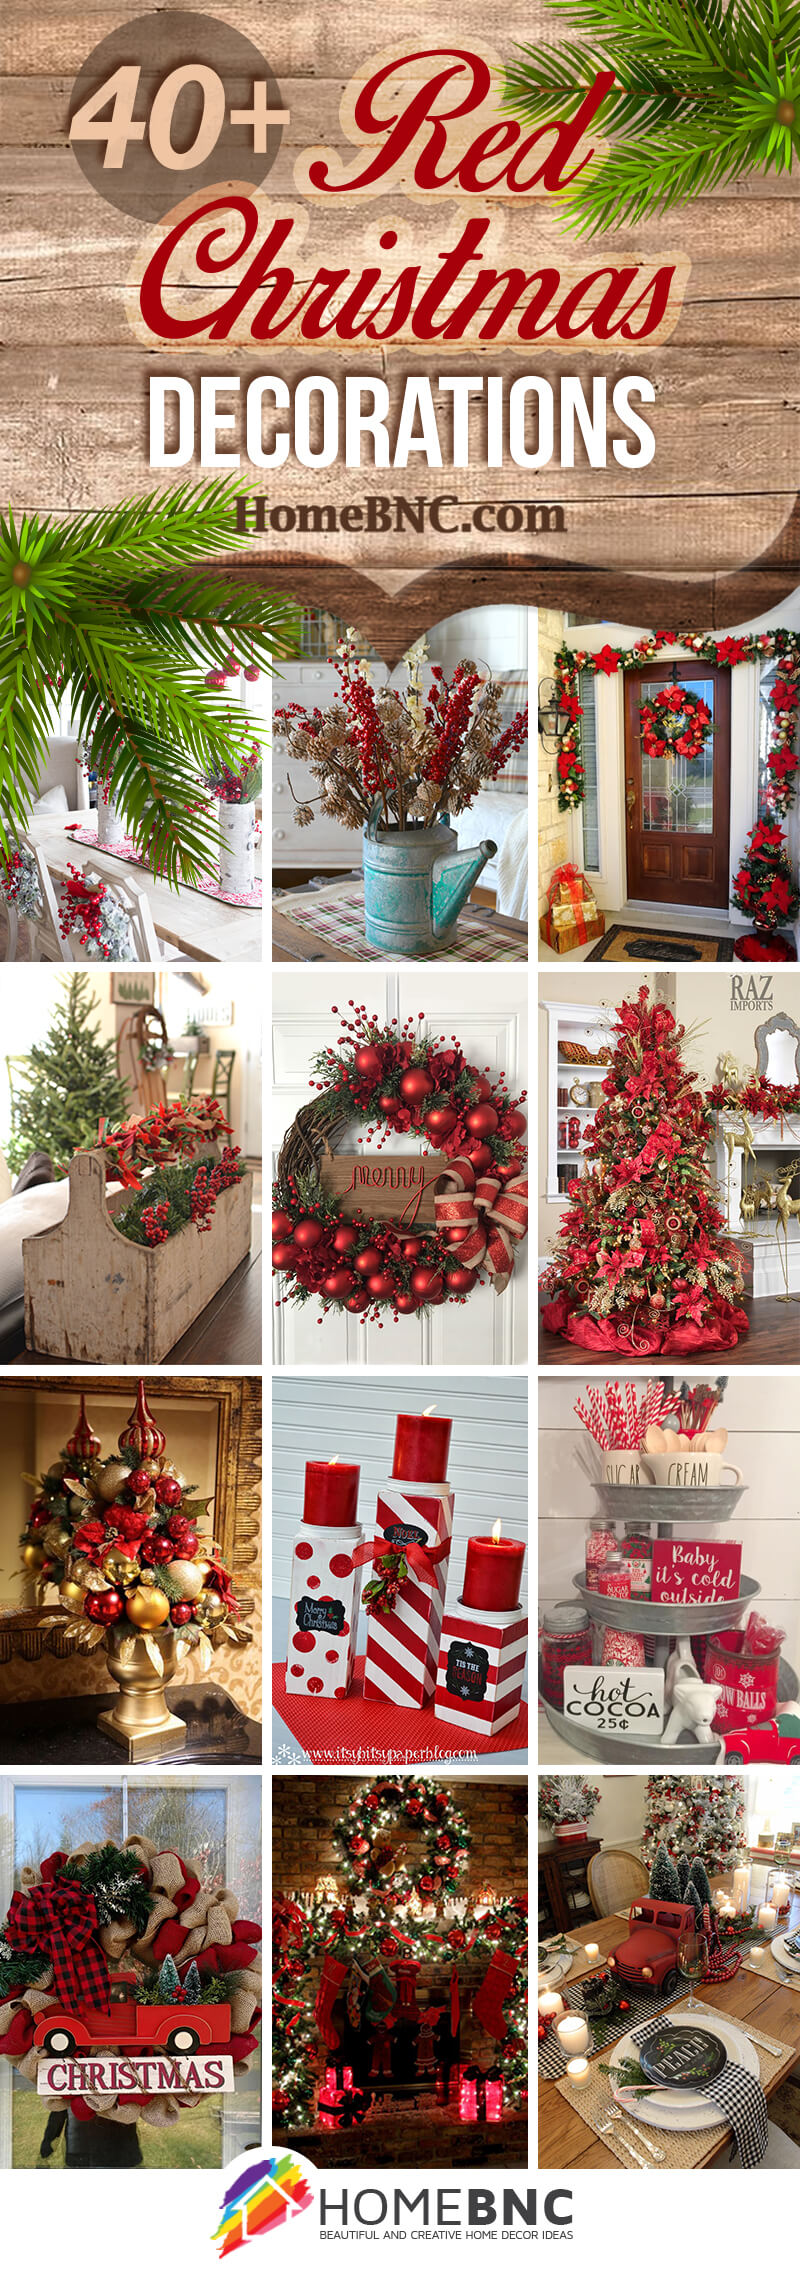 12 Themes for Christmas Decoration Ideas and More - Macy's Guide